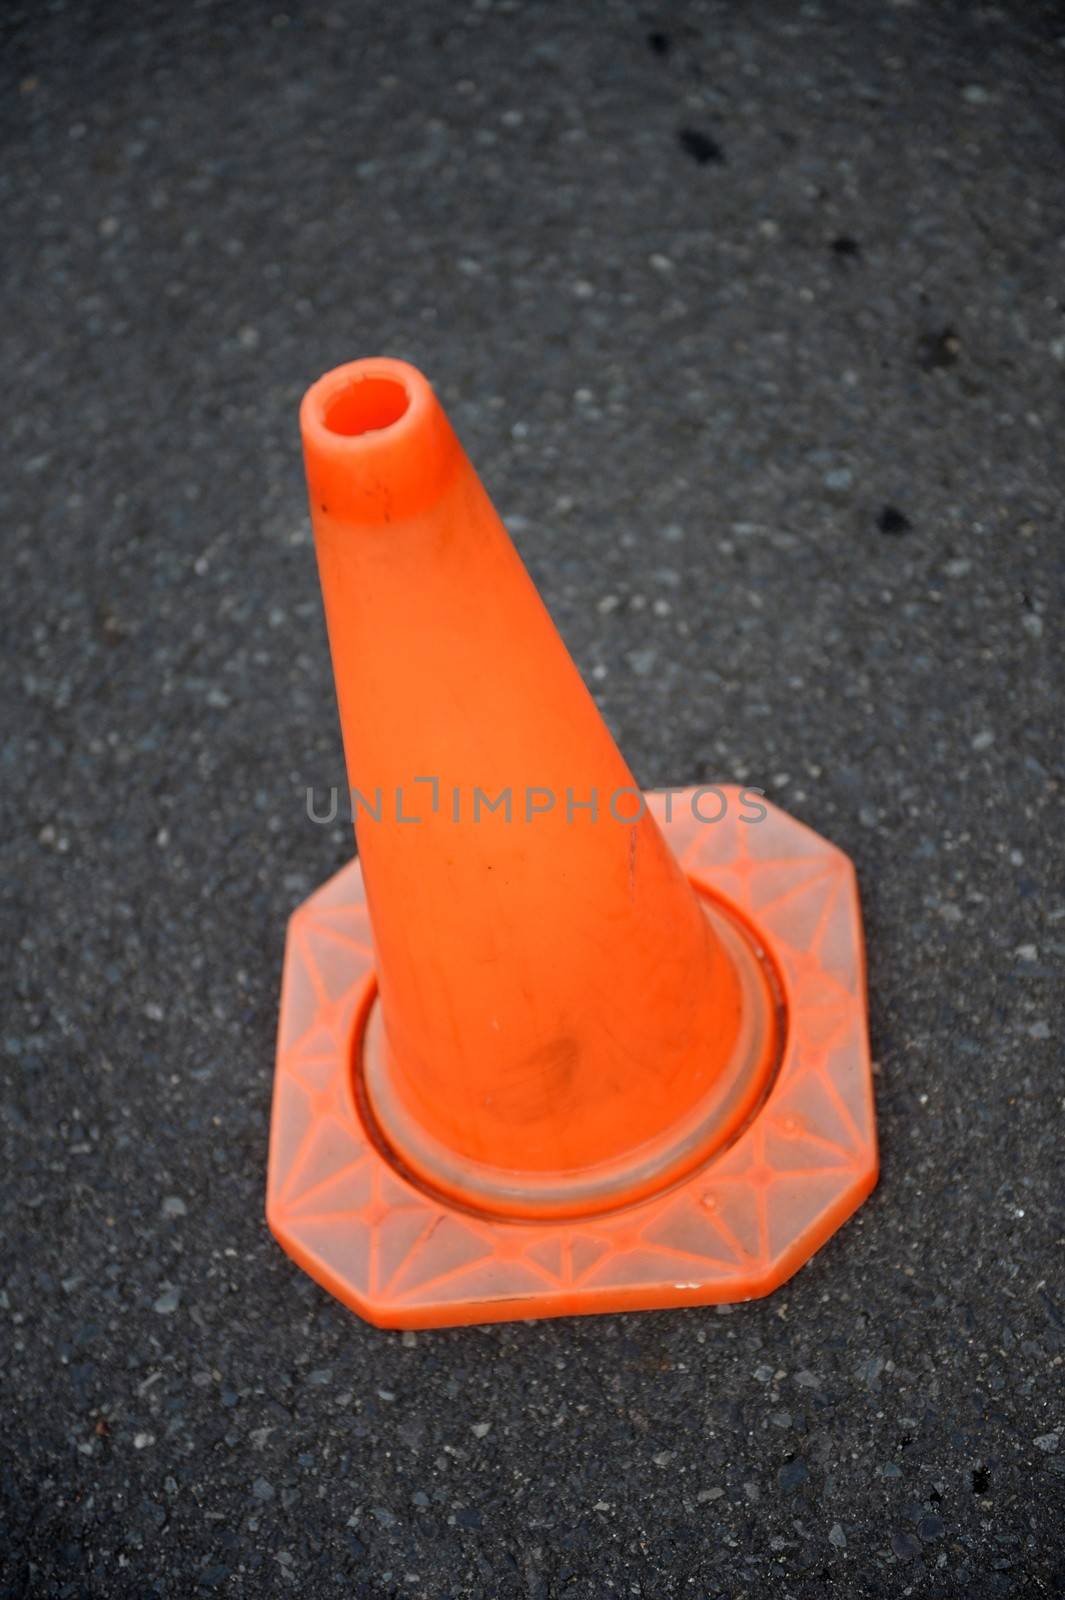 A close up shot of a safety cone on a road